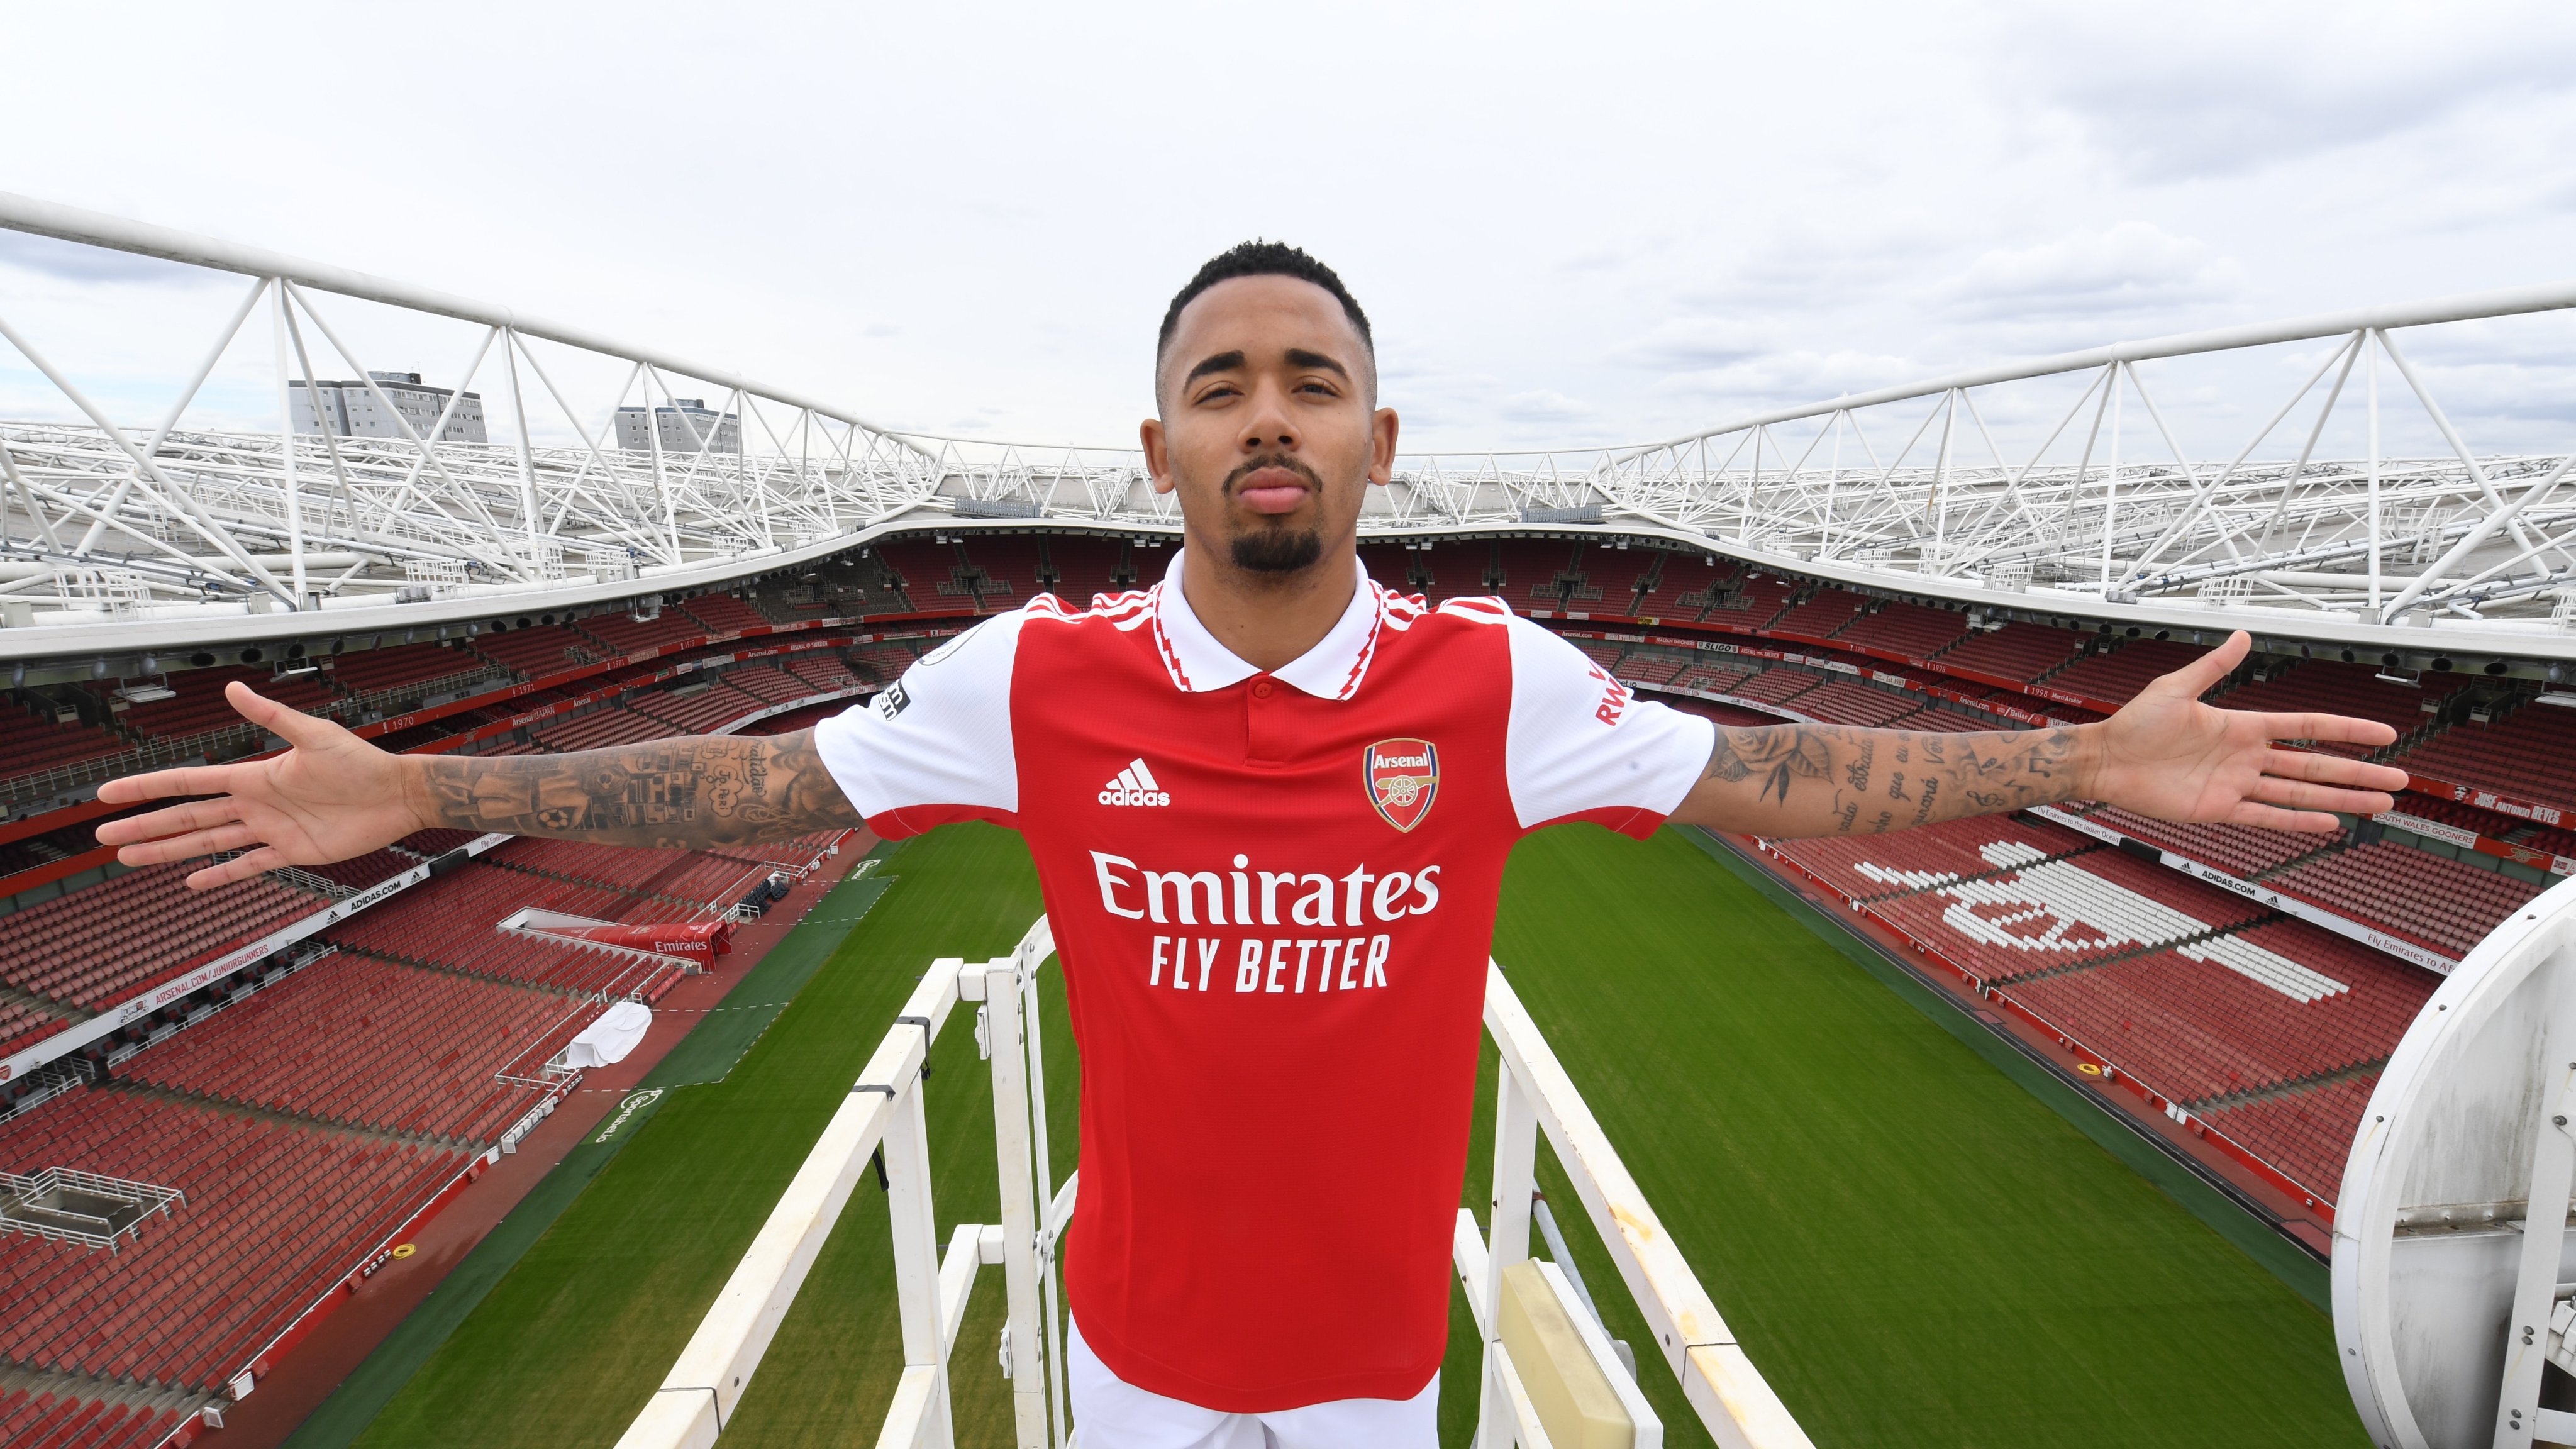 Signed for Arsenal because I trust in Mikel Arteta and the club, proclaims Gabriel Jesus